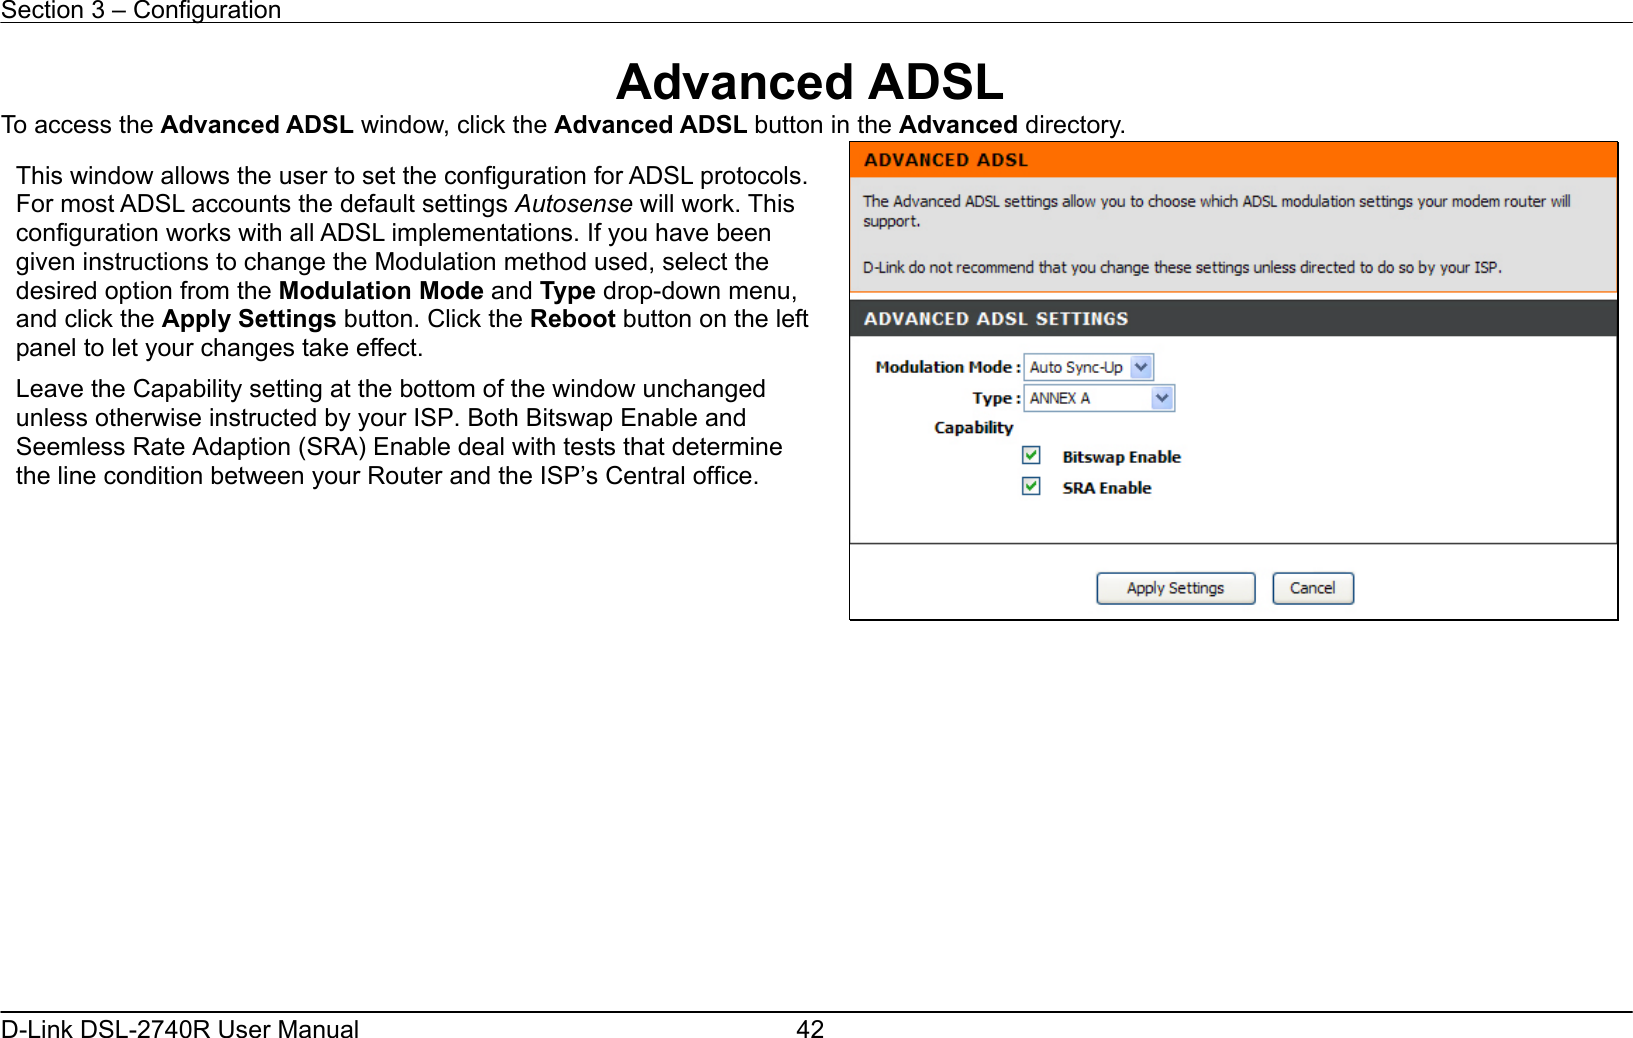 Section 3 – Configuration   D-Link DSL-2740R User Manual  42Advanced ADSL To access the Advanced ADSL window, click the Advanced ADSL button in the Advanced directory.               This window allows the user to set the configuration for ADSL protocols. For most ADSL accounts the default settings Autosense will work. This configuration works with all ADSL implementations. If you have been given instructions to change the Modulation method used, select the desired option from the Modulation Mode and Type drop-down menu, and click the Apply Settings button. Click the Reboot button on the leftpanel to let your changes take effect. Leave the Capability setting at the bottom of the window unchanged unless otherwise instructed by your ISP. Both Bitswap Enable and Seemless Rate Adaption (SRA) Enable deal with tests that determine the line condition between your Router and the ISP’s Central office.  